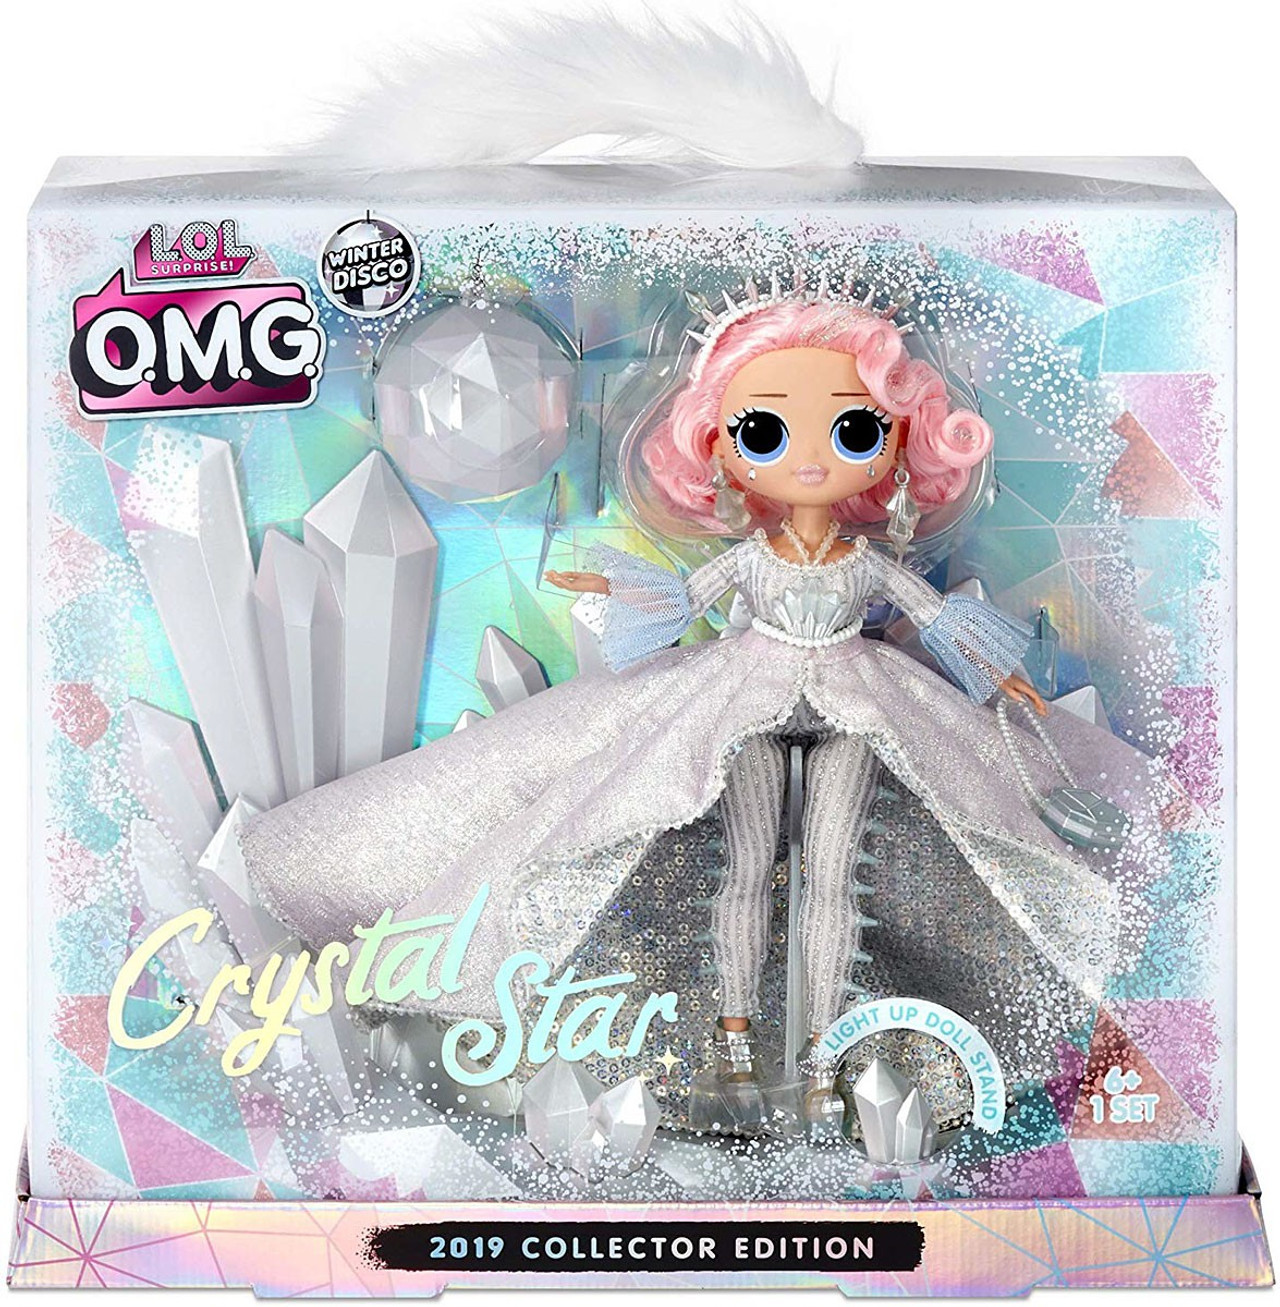 Lol Surprise Winter Disco 2019 Omg Collector Edition Crystal Star Fashion Doll Mga Entertainment